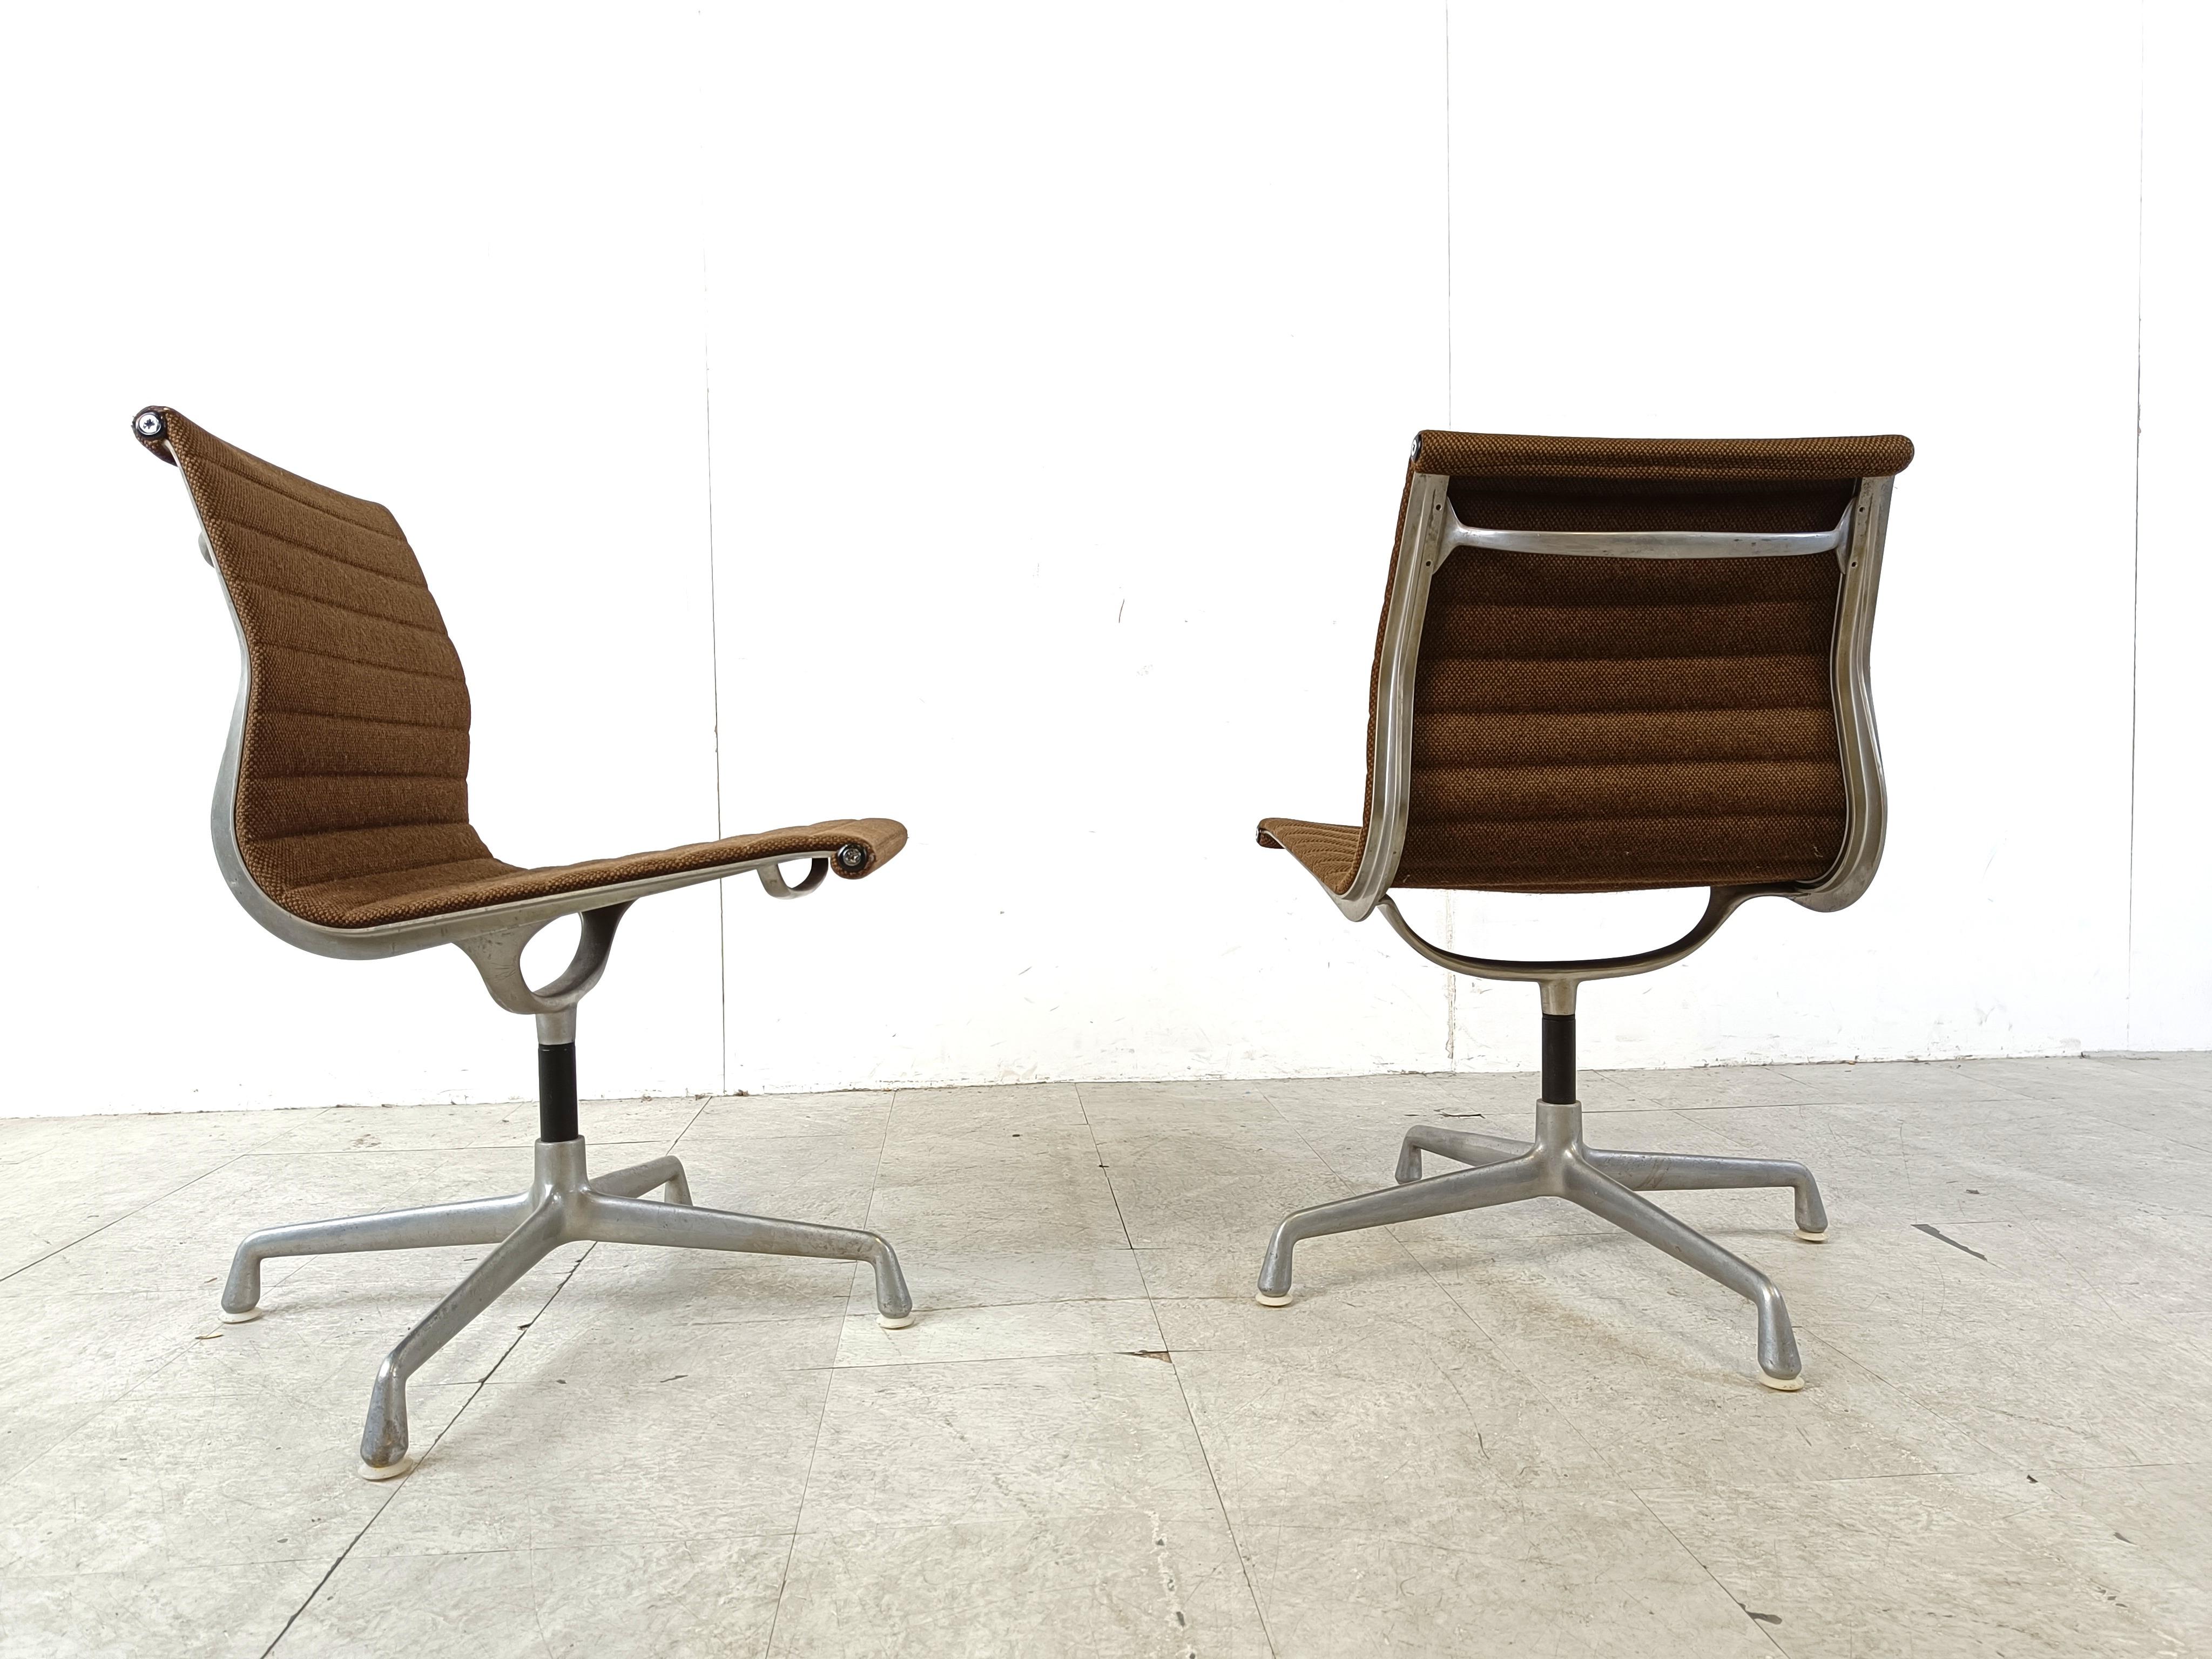 Fabric Vintage eames desk chairs EA108 for herman miller, 1970s - set of 2 For Sale